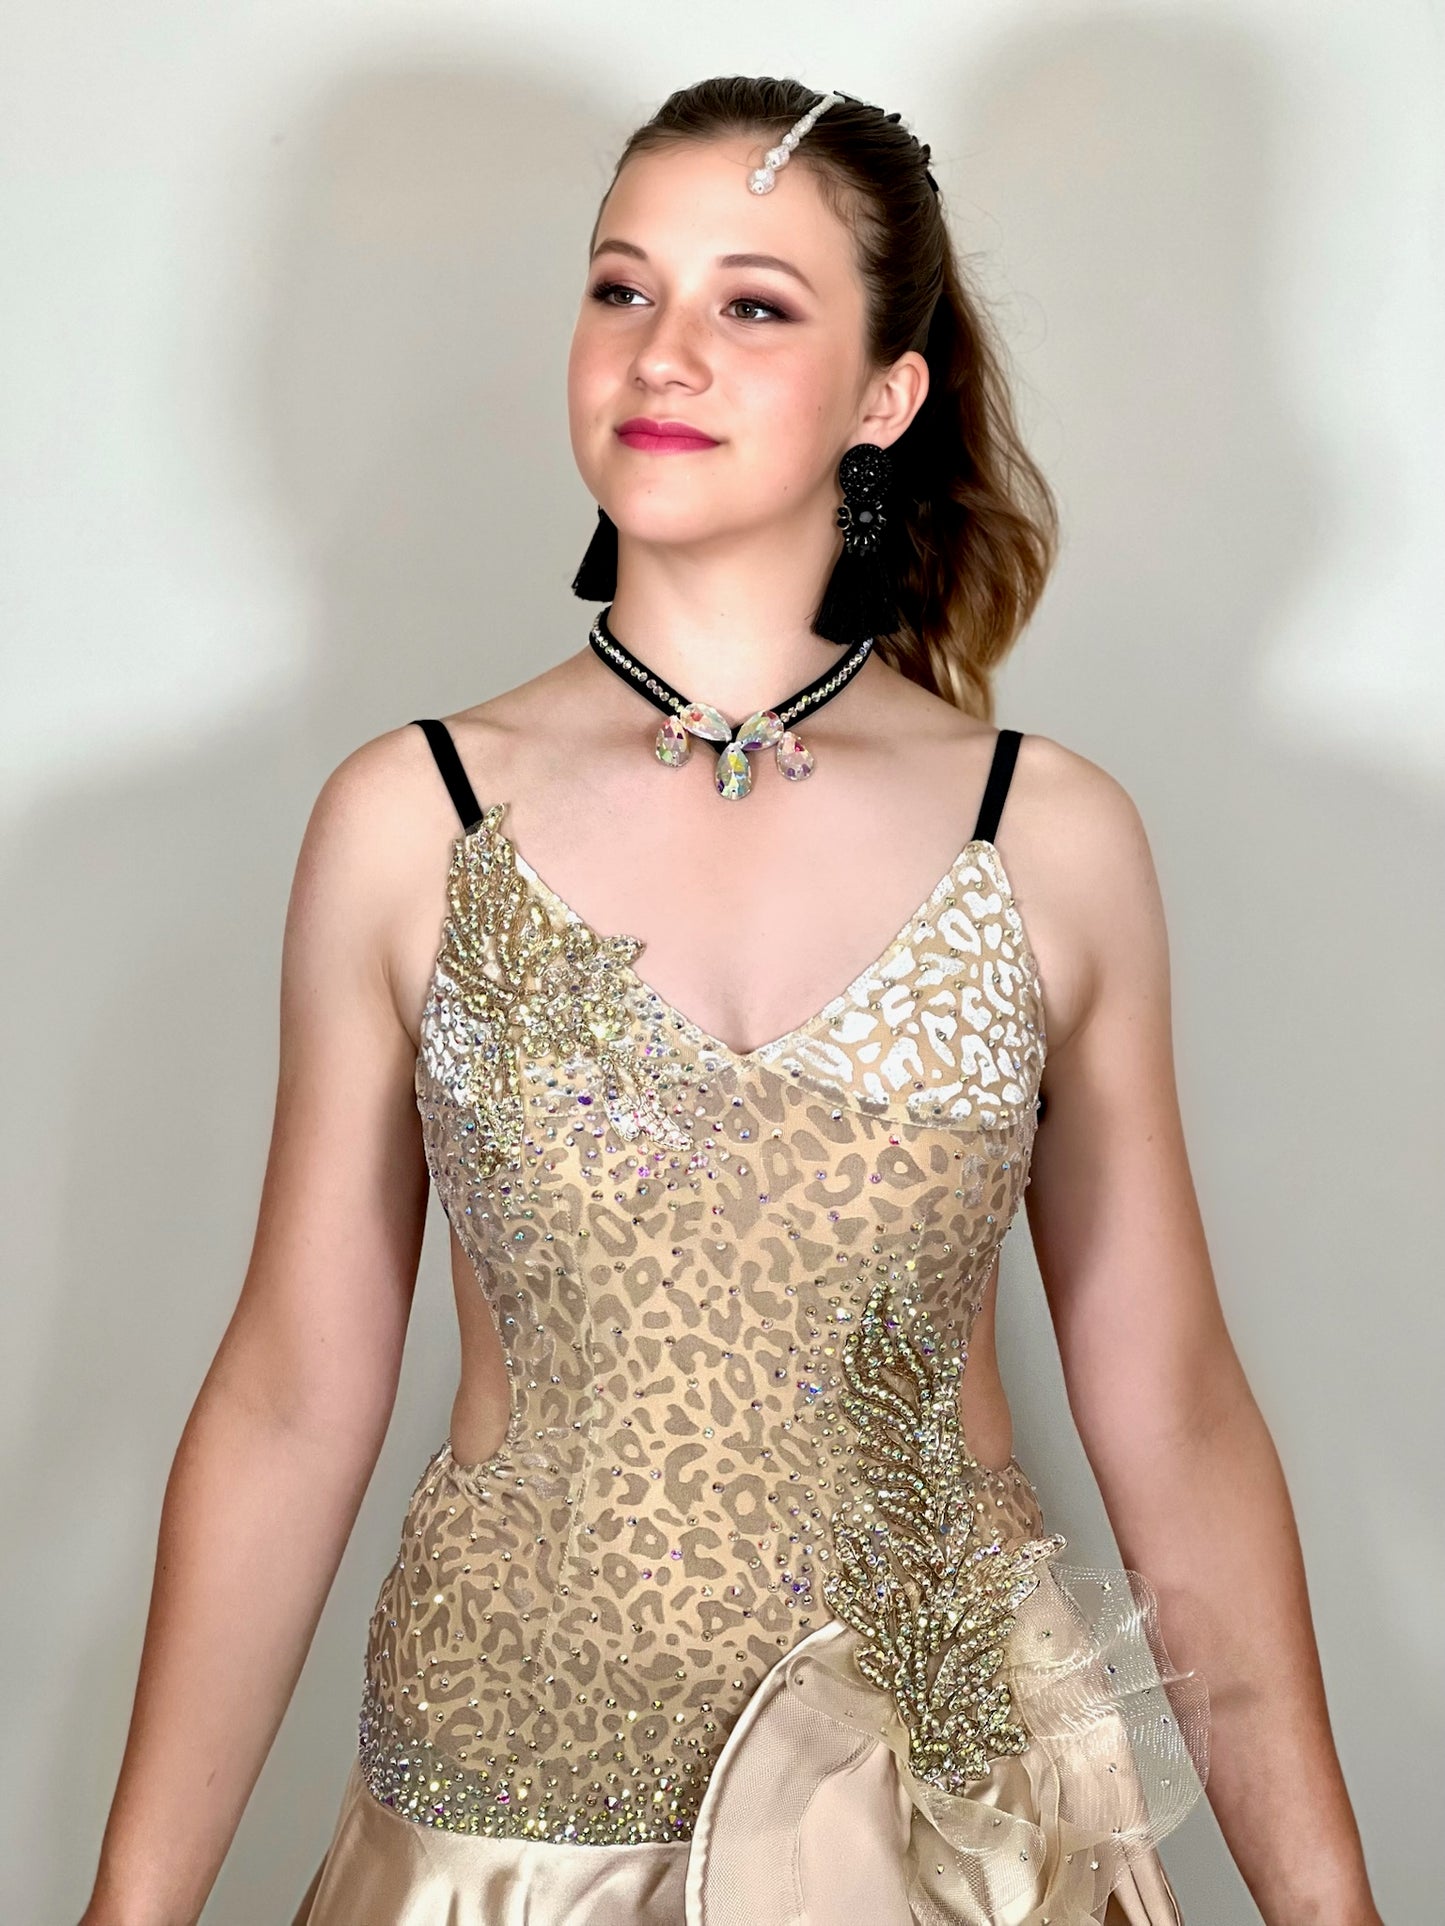 175 Champagne flick Leopard fabric Latin dress. Soft satin skirt with motif detailing to one hip. Gold appliqué with AB stones